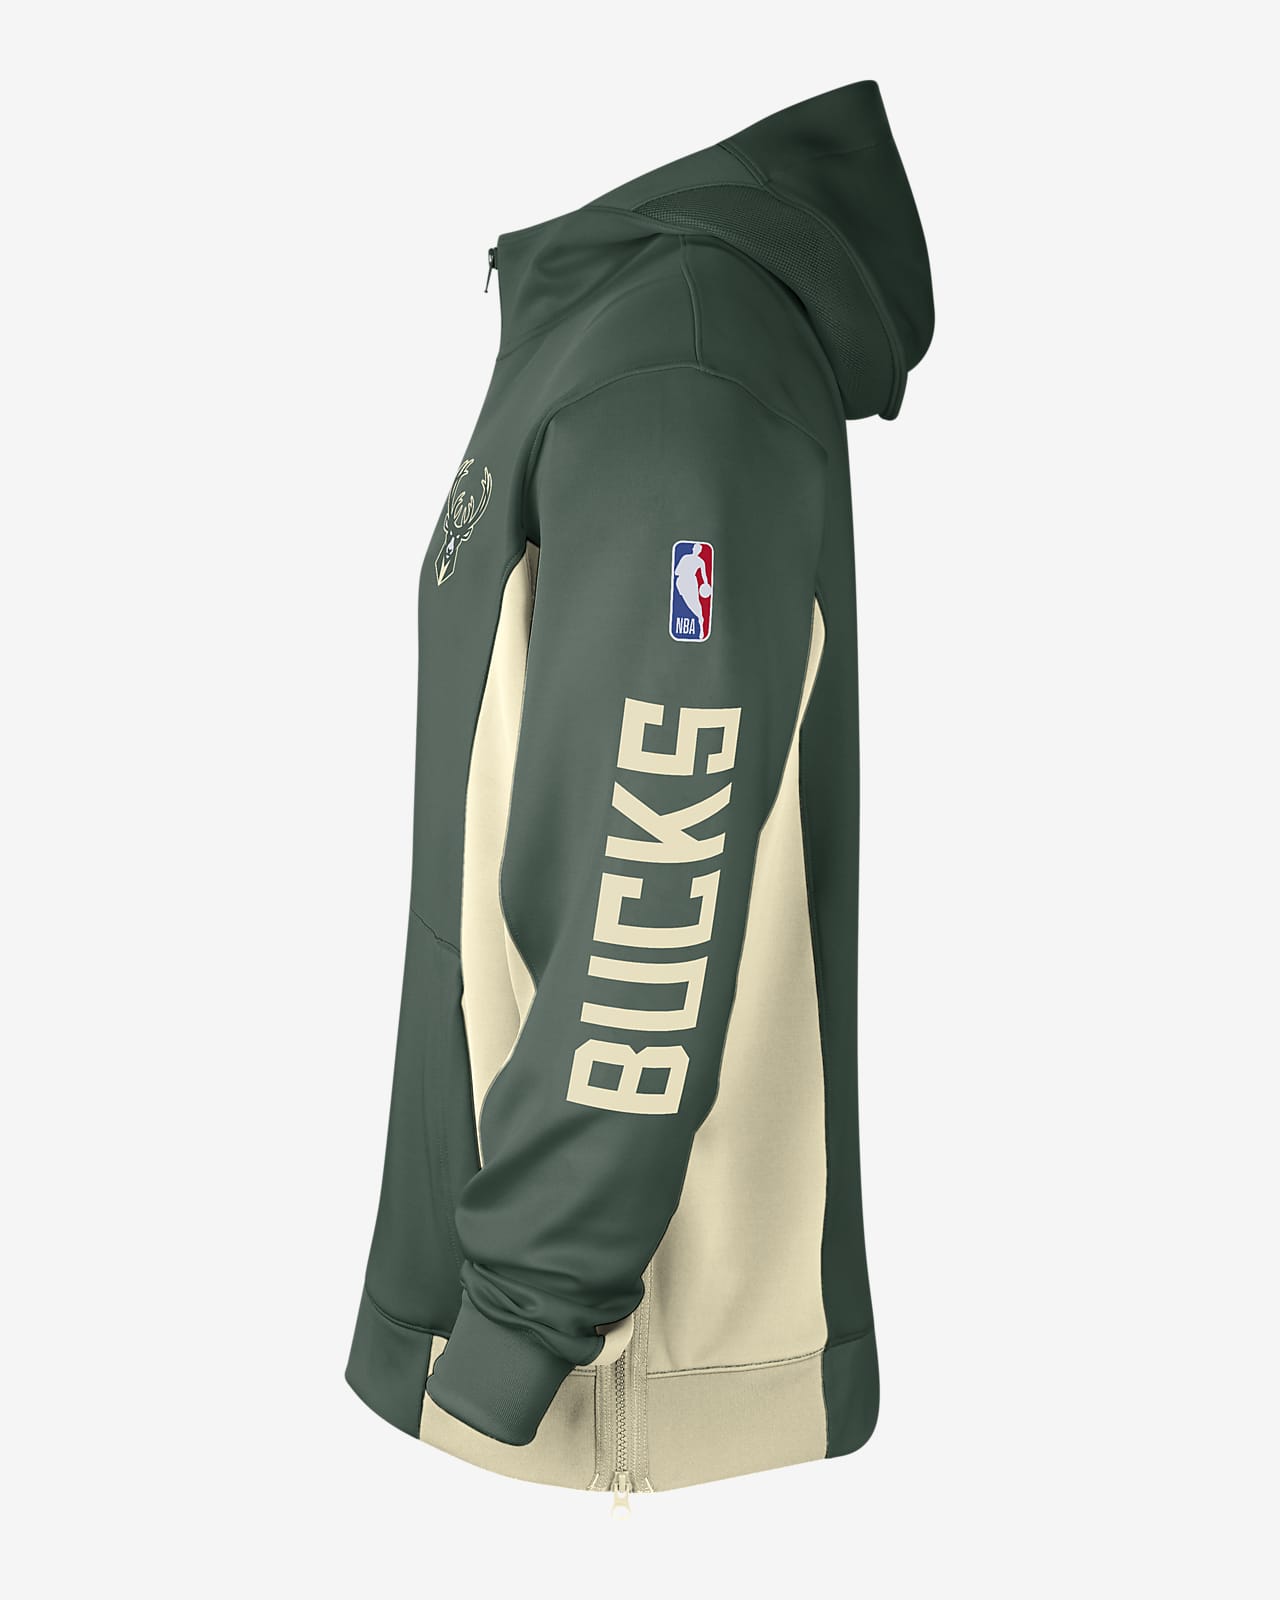 Nike Milwaukee Bucks Showtime Dri-fit Nba Full-zip Hoodie 50% Recycled  Polyester in Green for Men